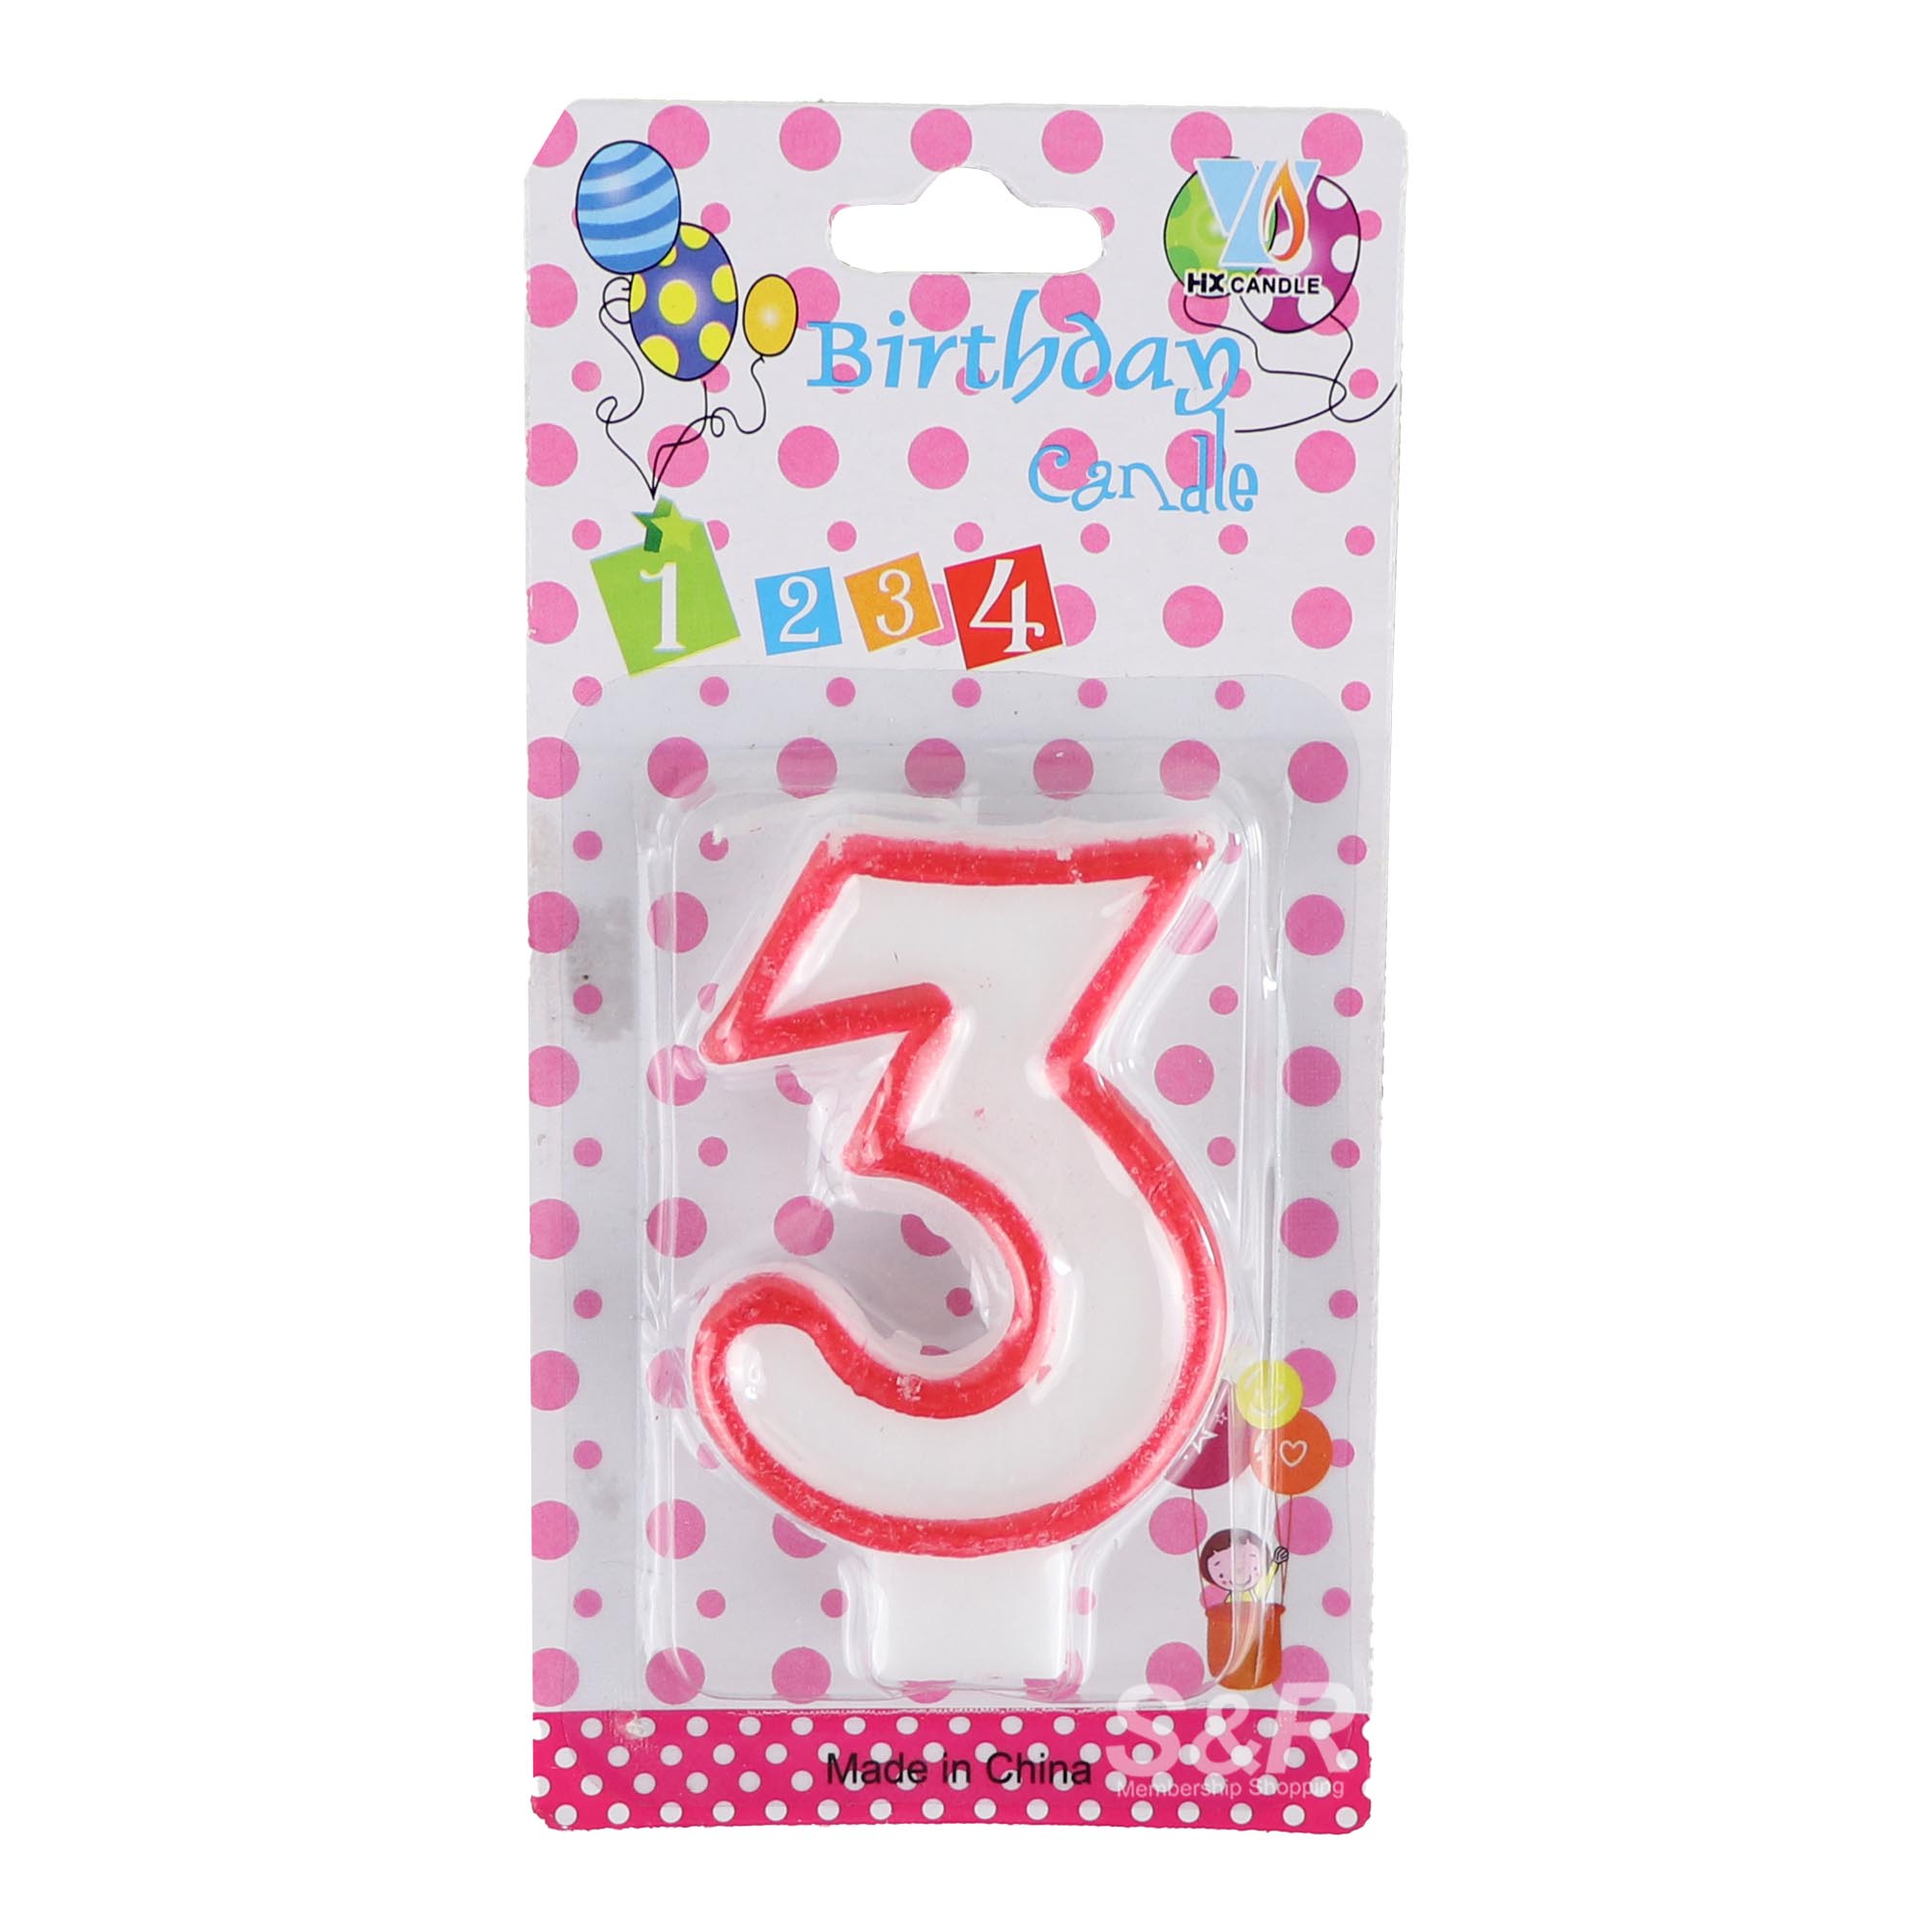 S&R #3 Birthday Candle 1pc